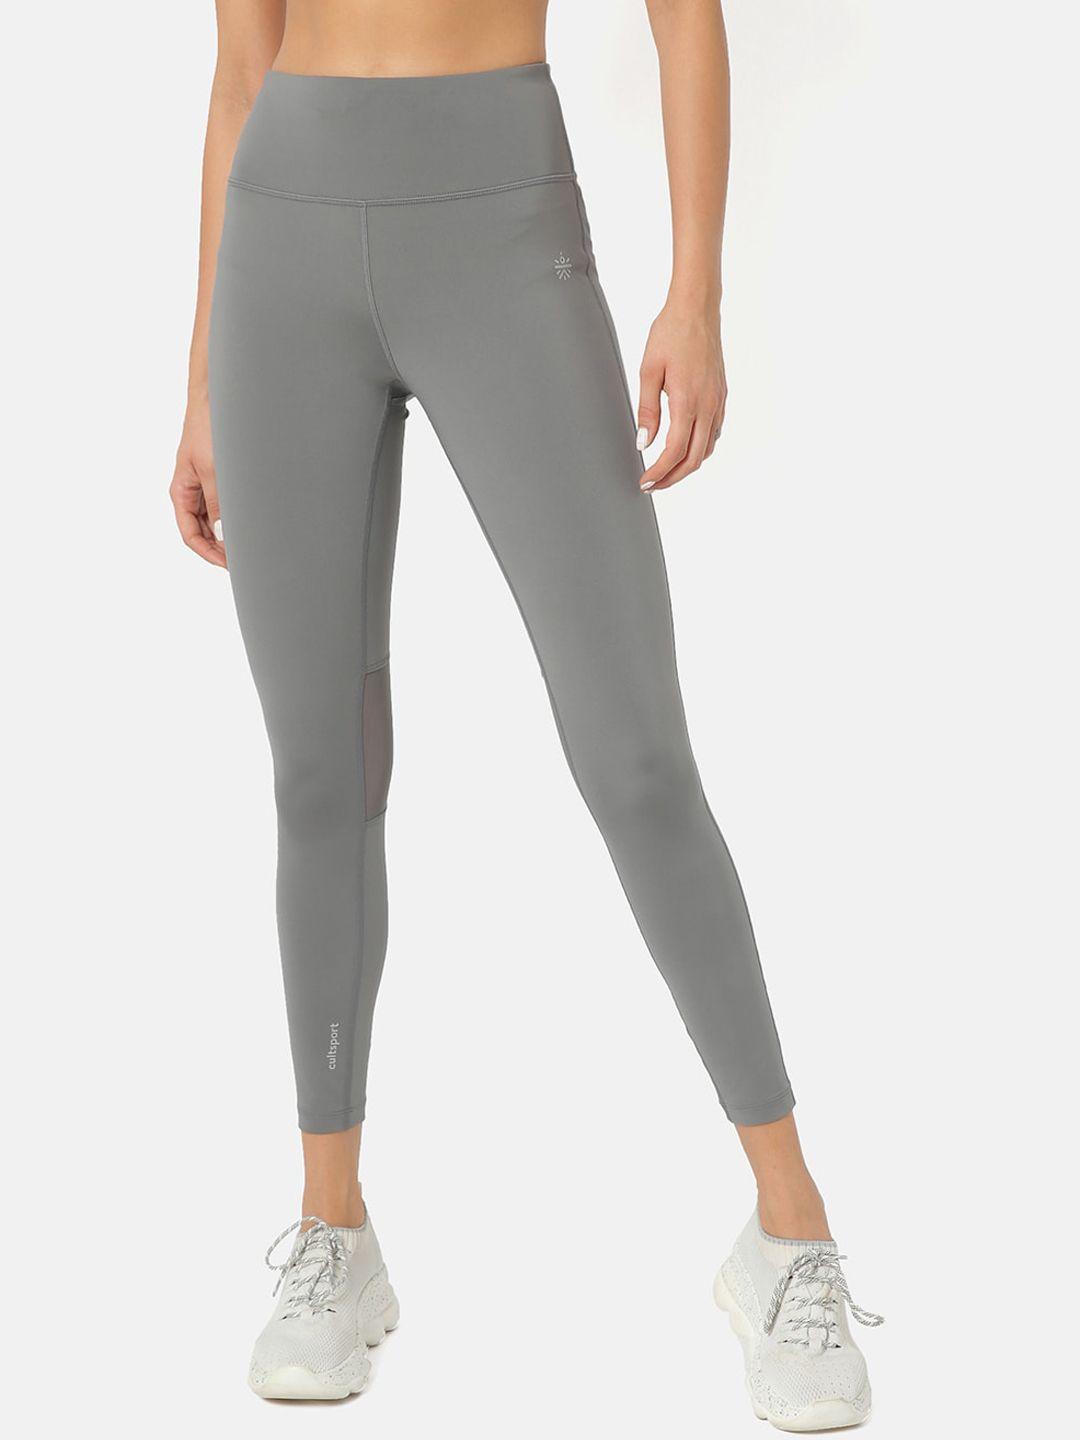 cultsport women grey solid antimicrobial training tights